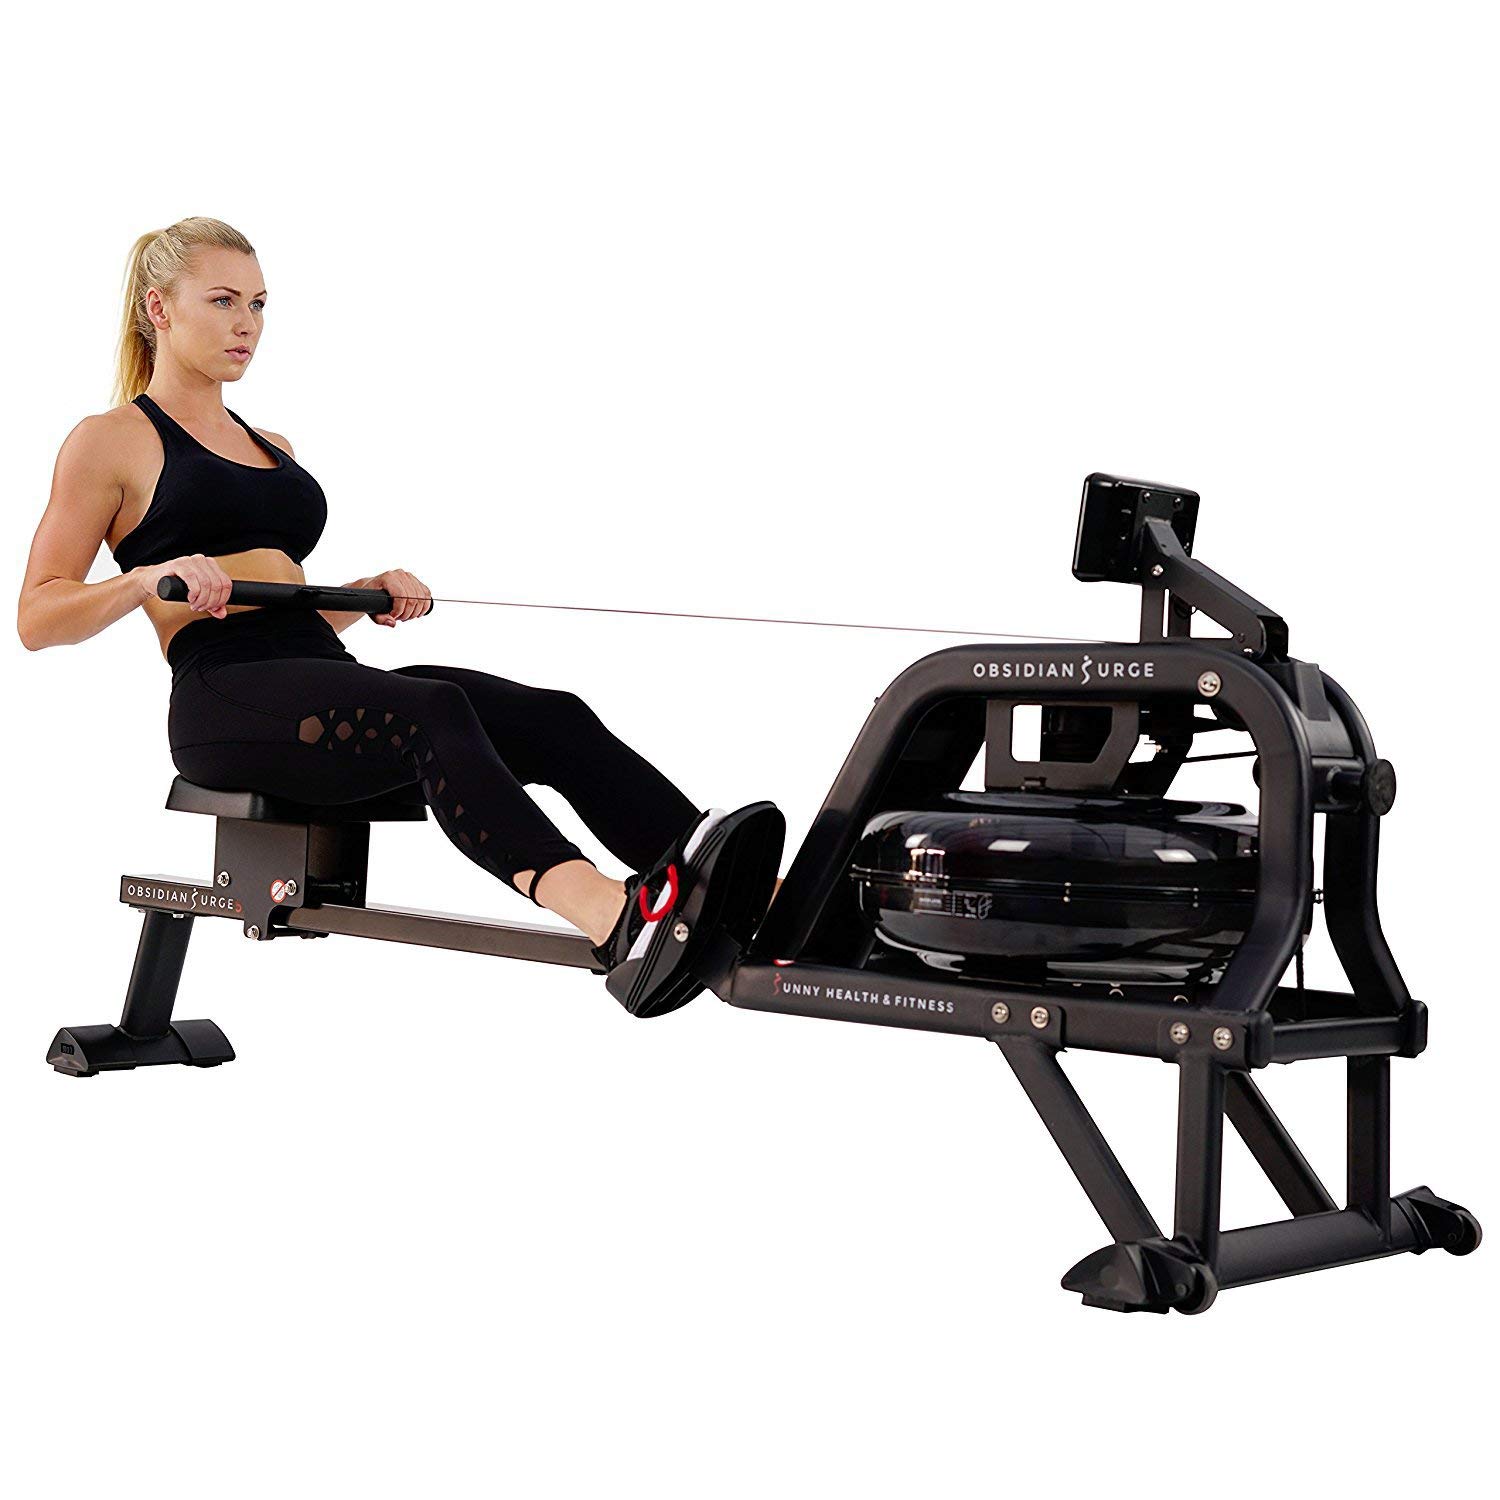 Sunny Health Obsidian Surge Water Rowing Machine